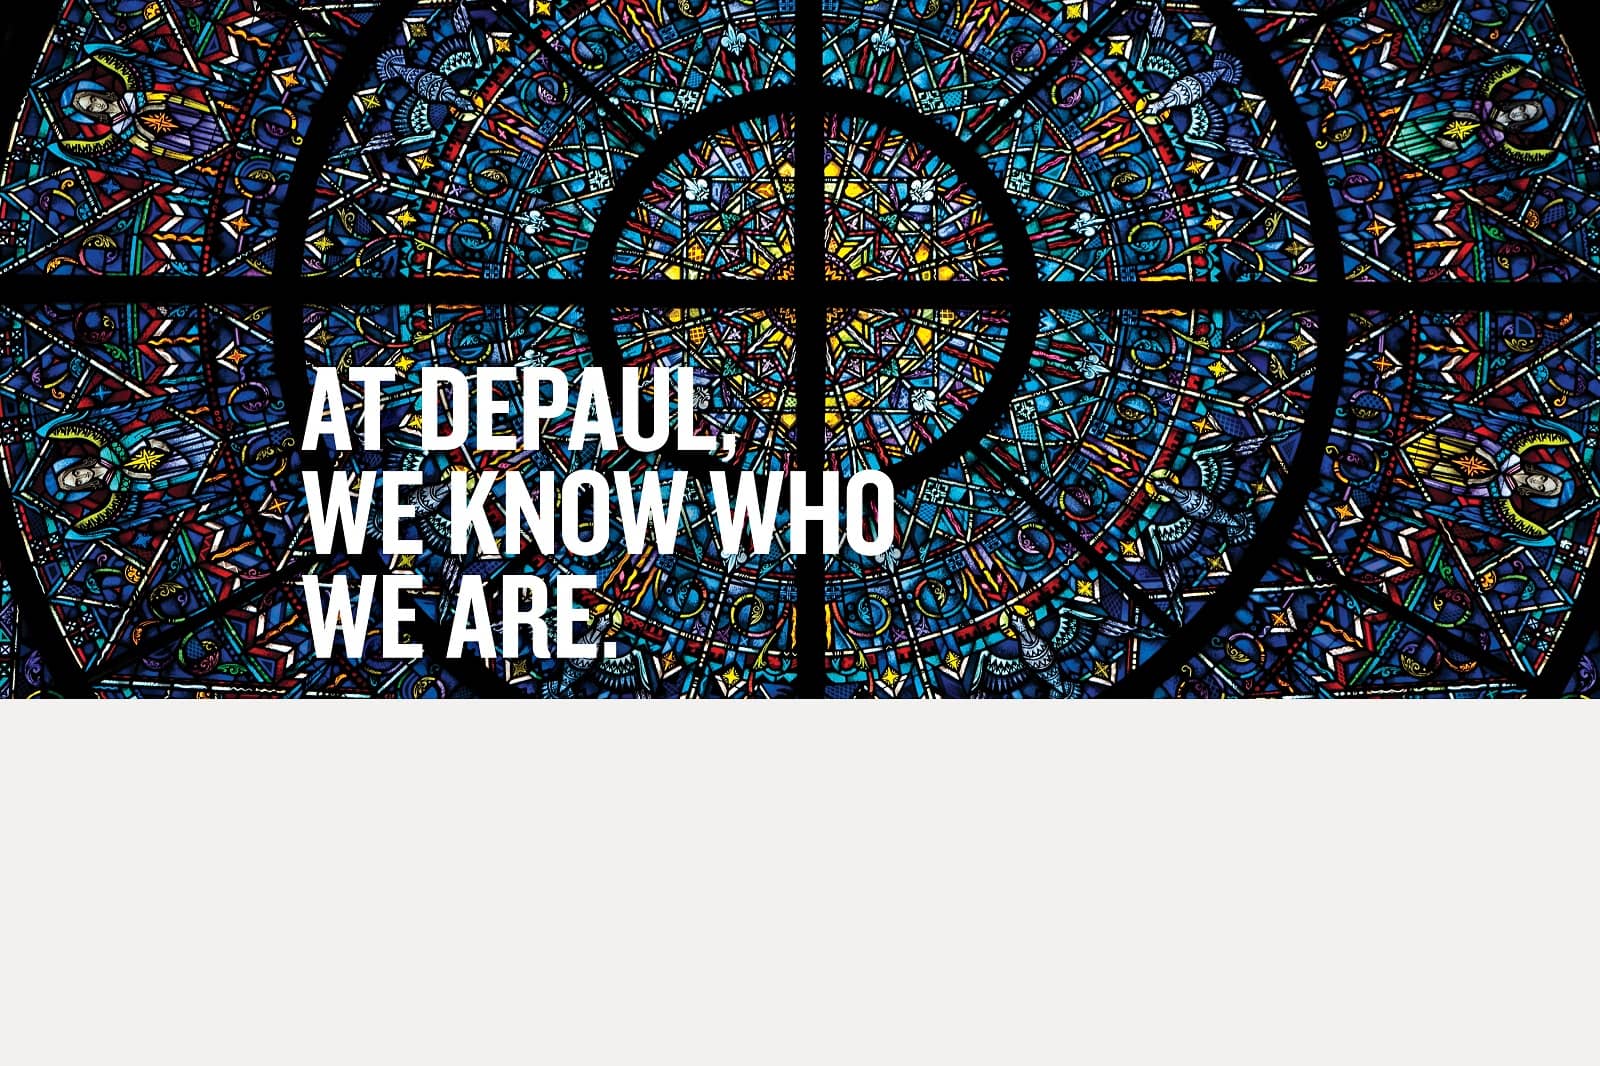 At DePaul, we know who we are.